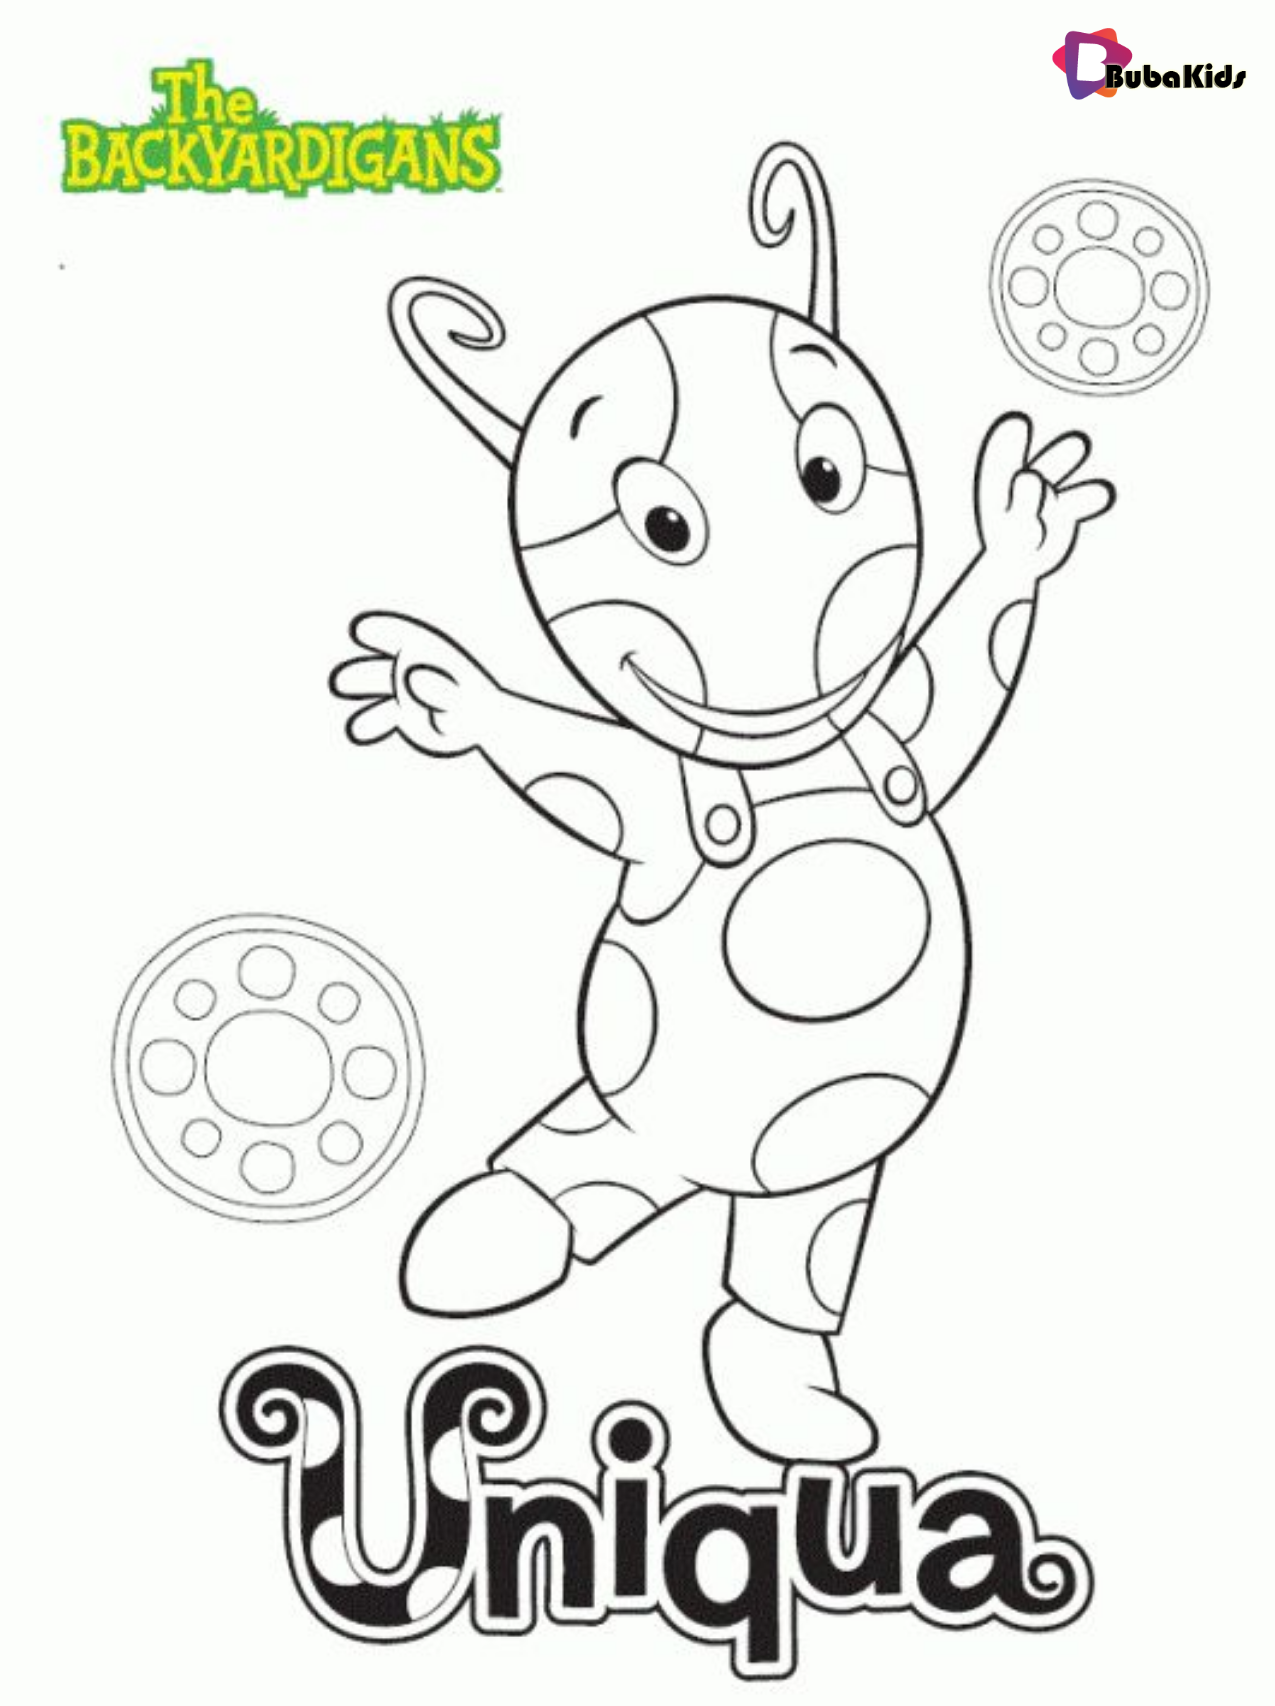 Uniqua From The Backyardigans Printable Coloring Pages – bubakids.com Wallpaper